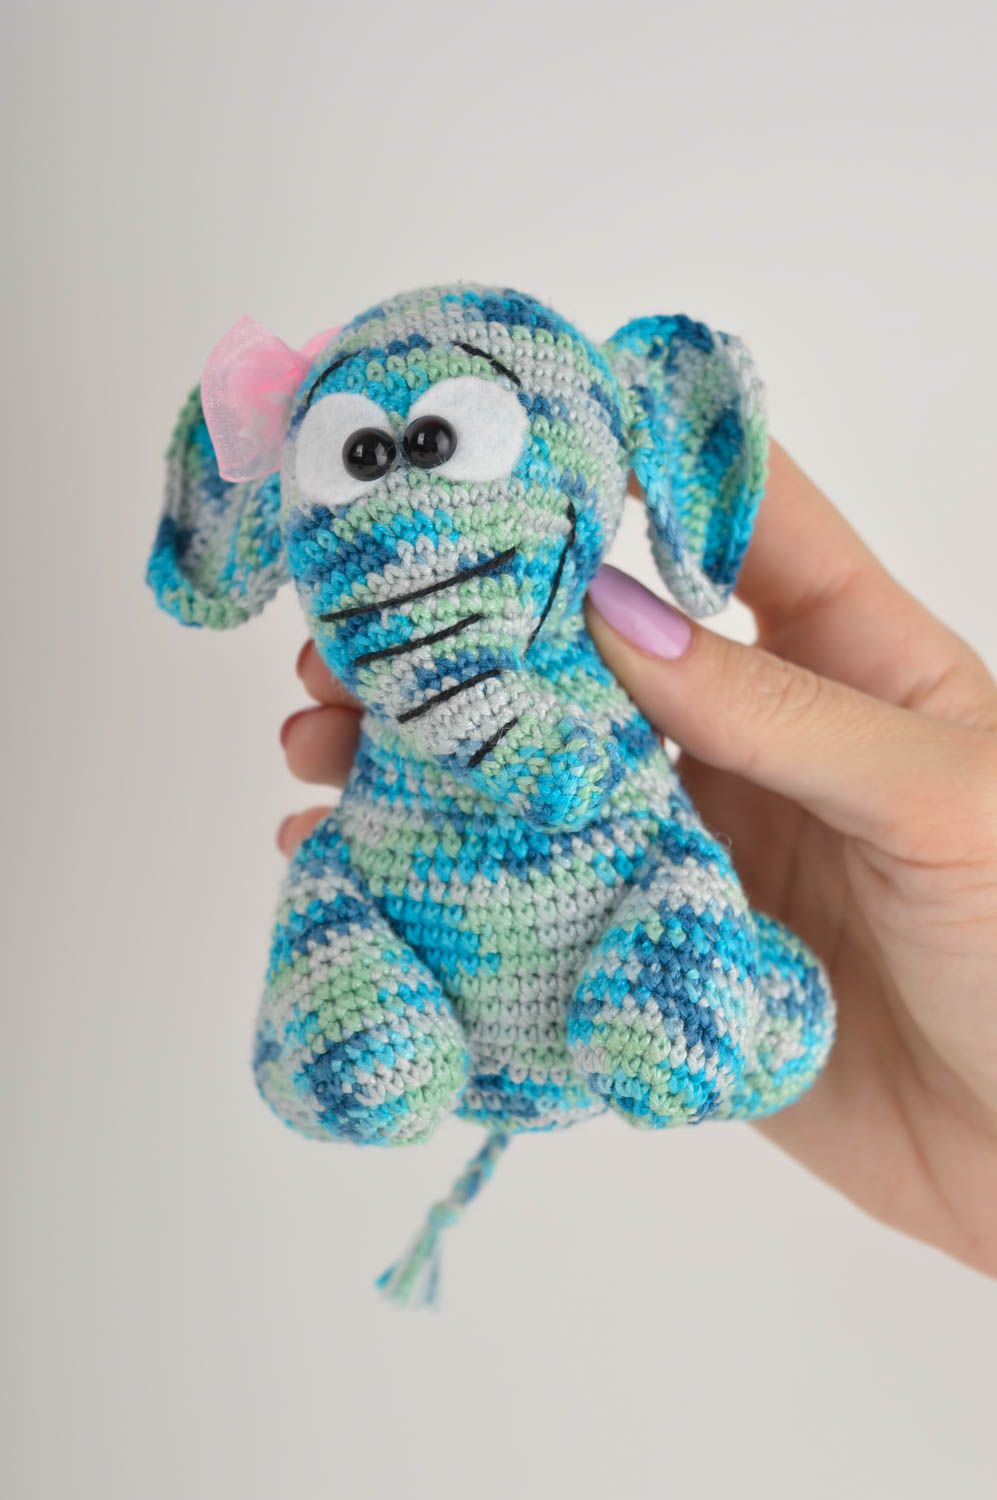 Knitted stuffed baby elephant toy in white and blue colors. 4 inches tall photo 5